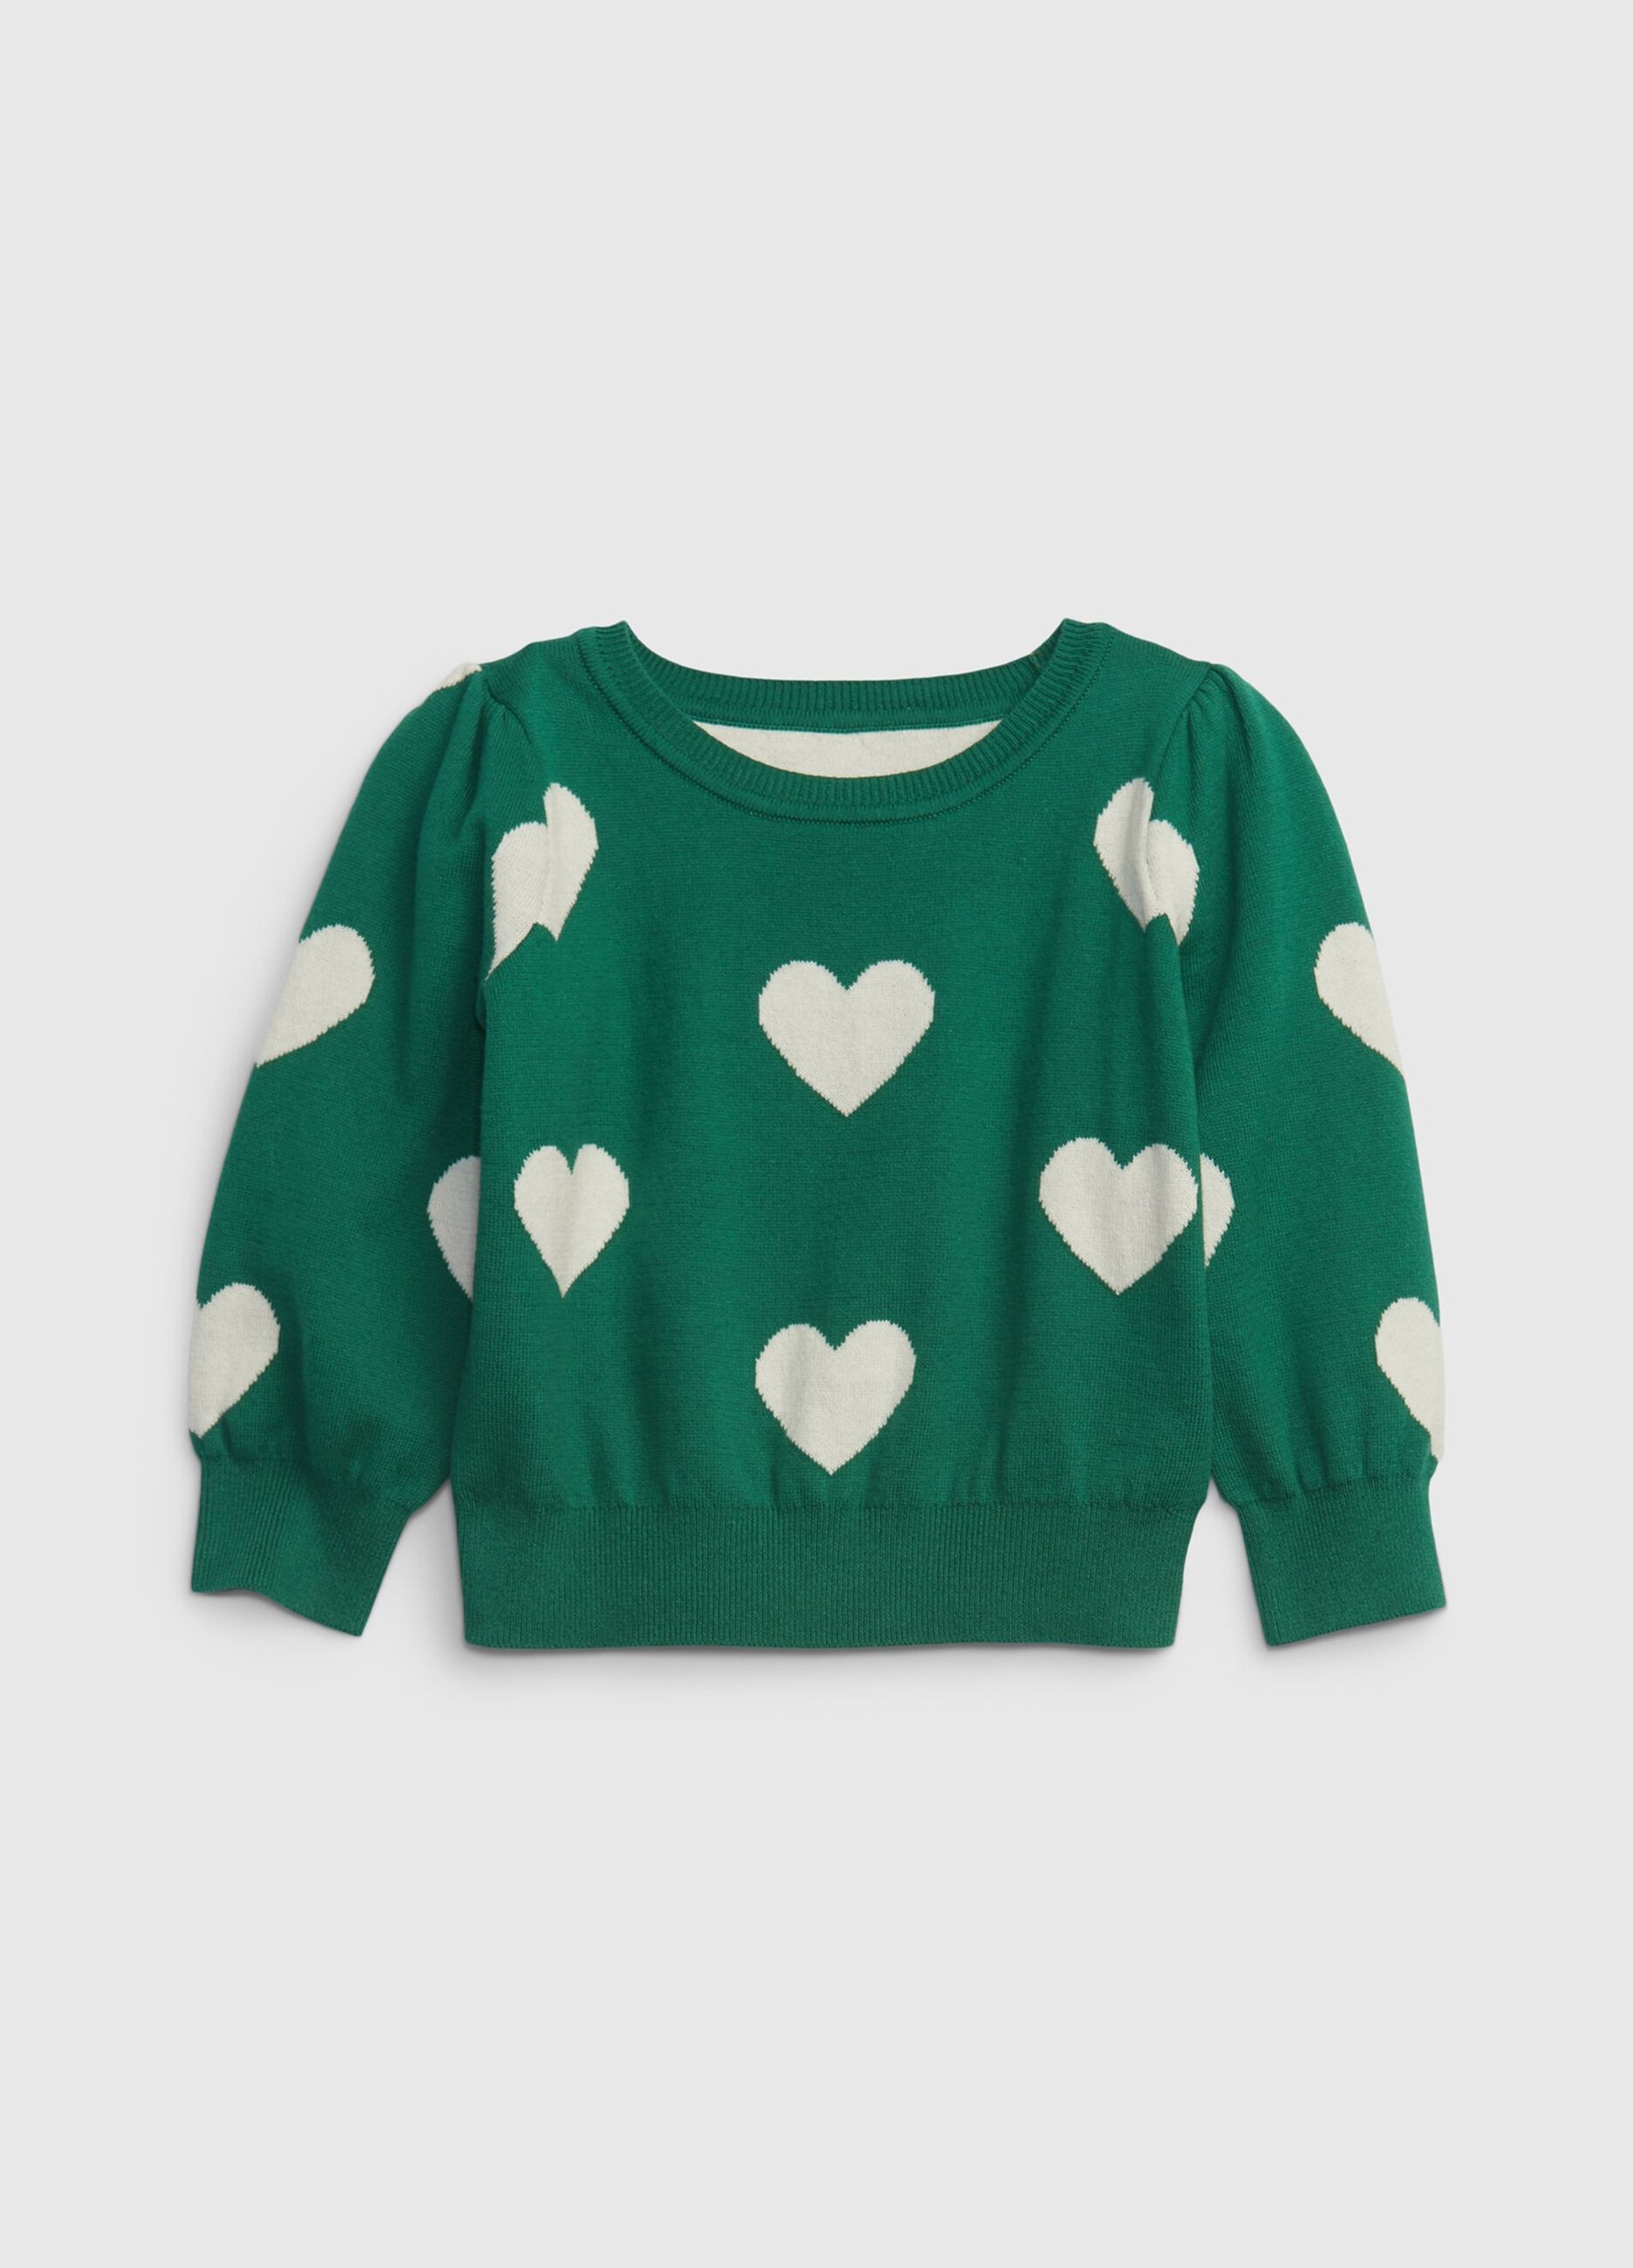 Top with jacquard heart pattern